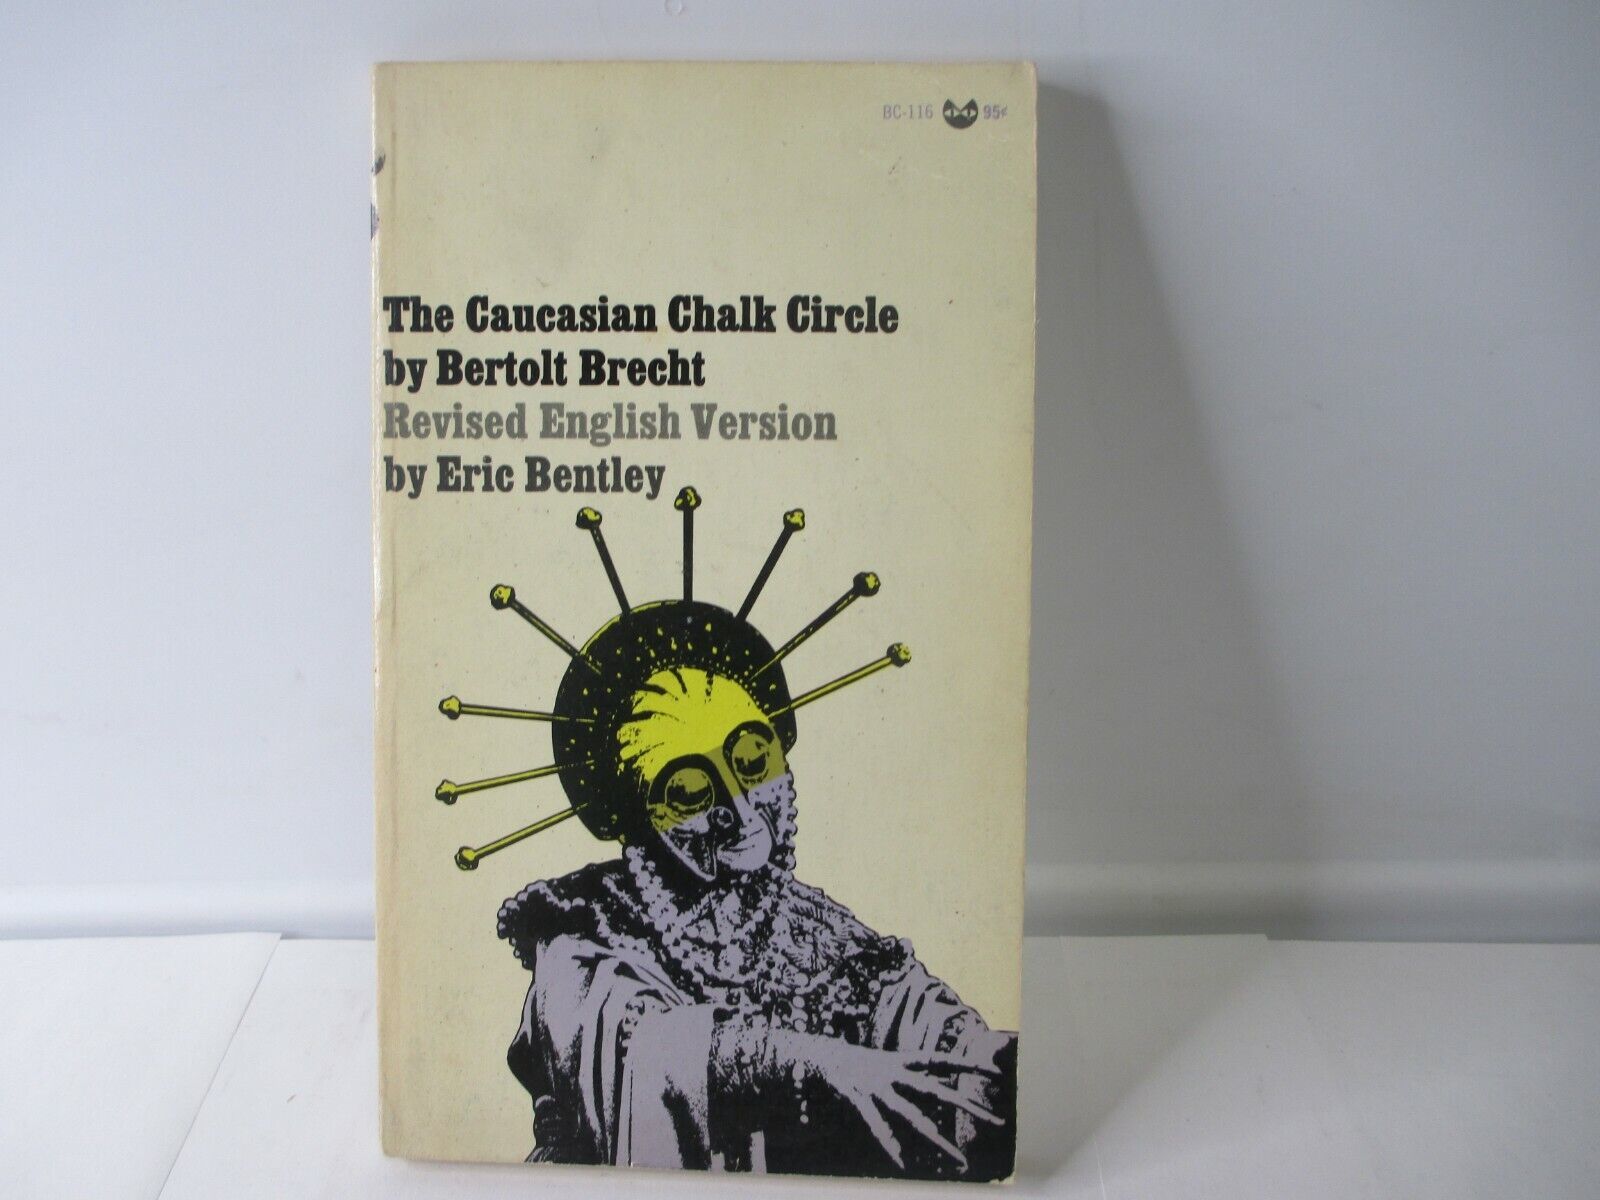 Primary image for The Caucasian Chalk Circle by Bertolt Brecht (Trade Paperback)1966 3d Printing